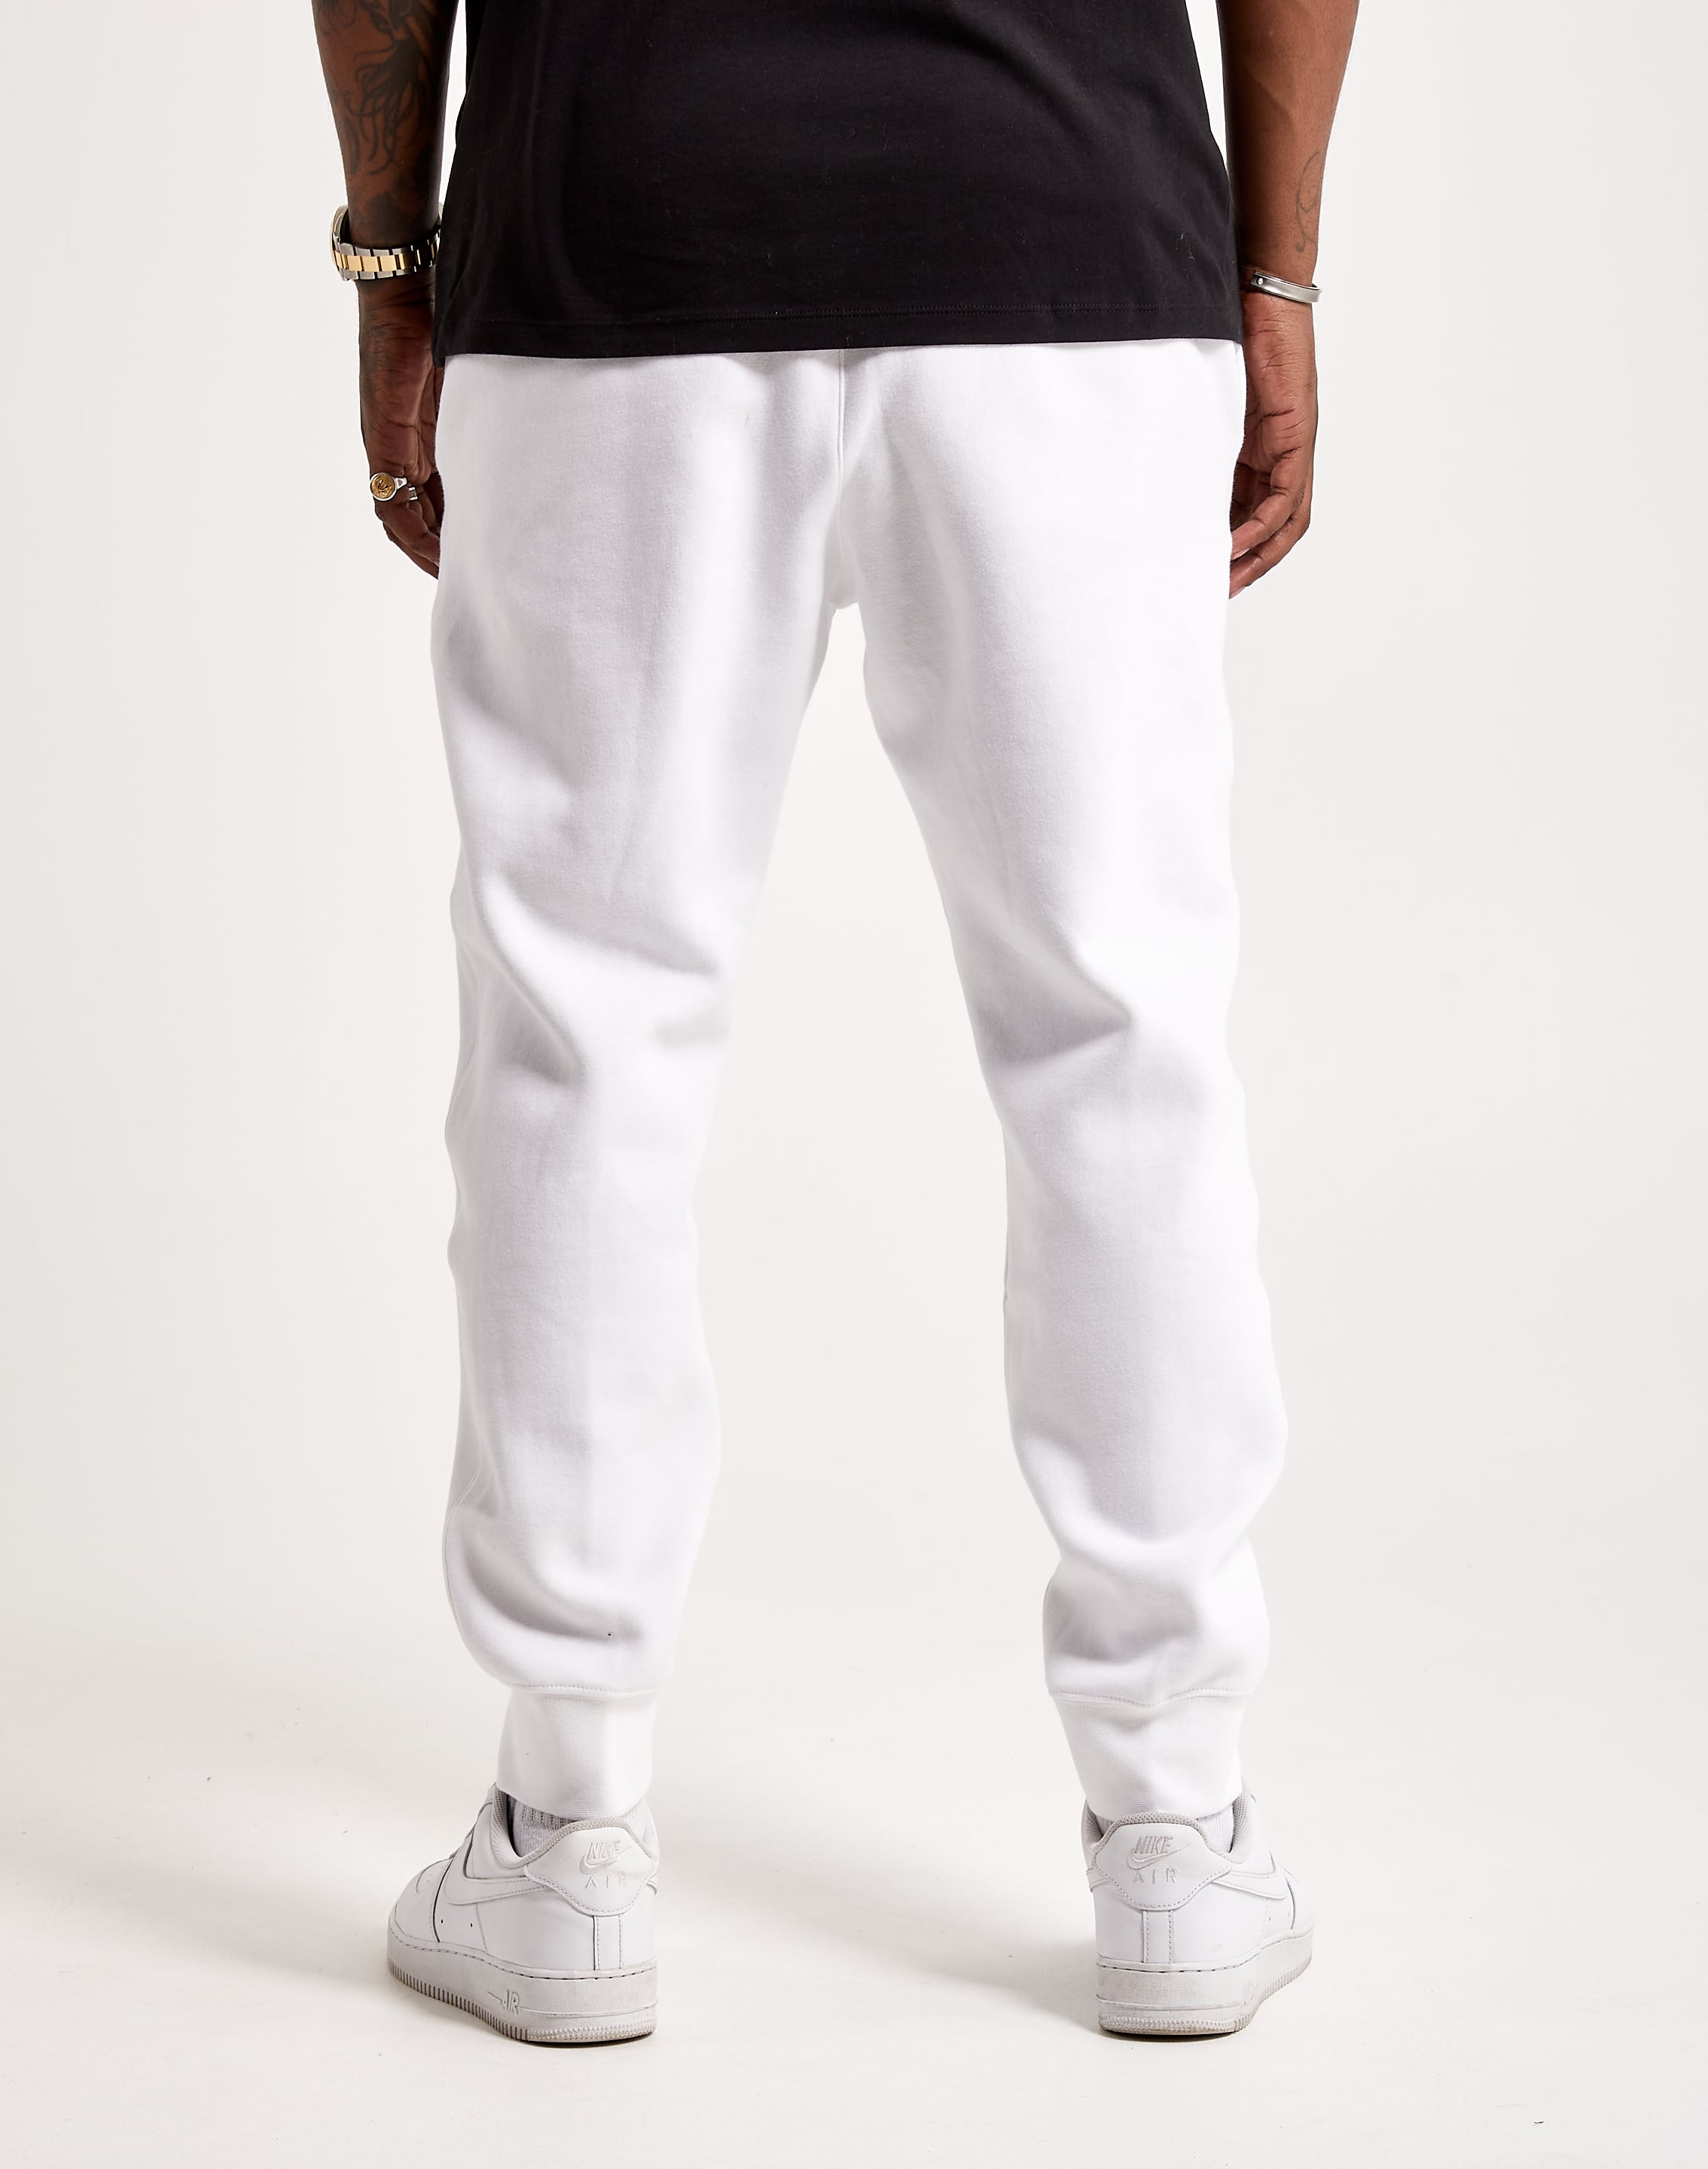 Nike Therma-FIT One Joggers – DTLR